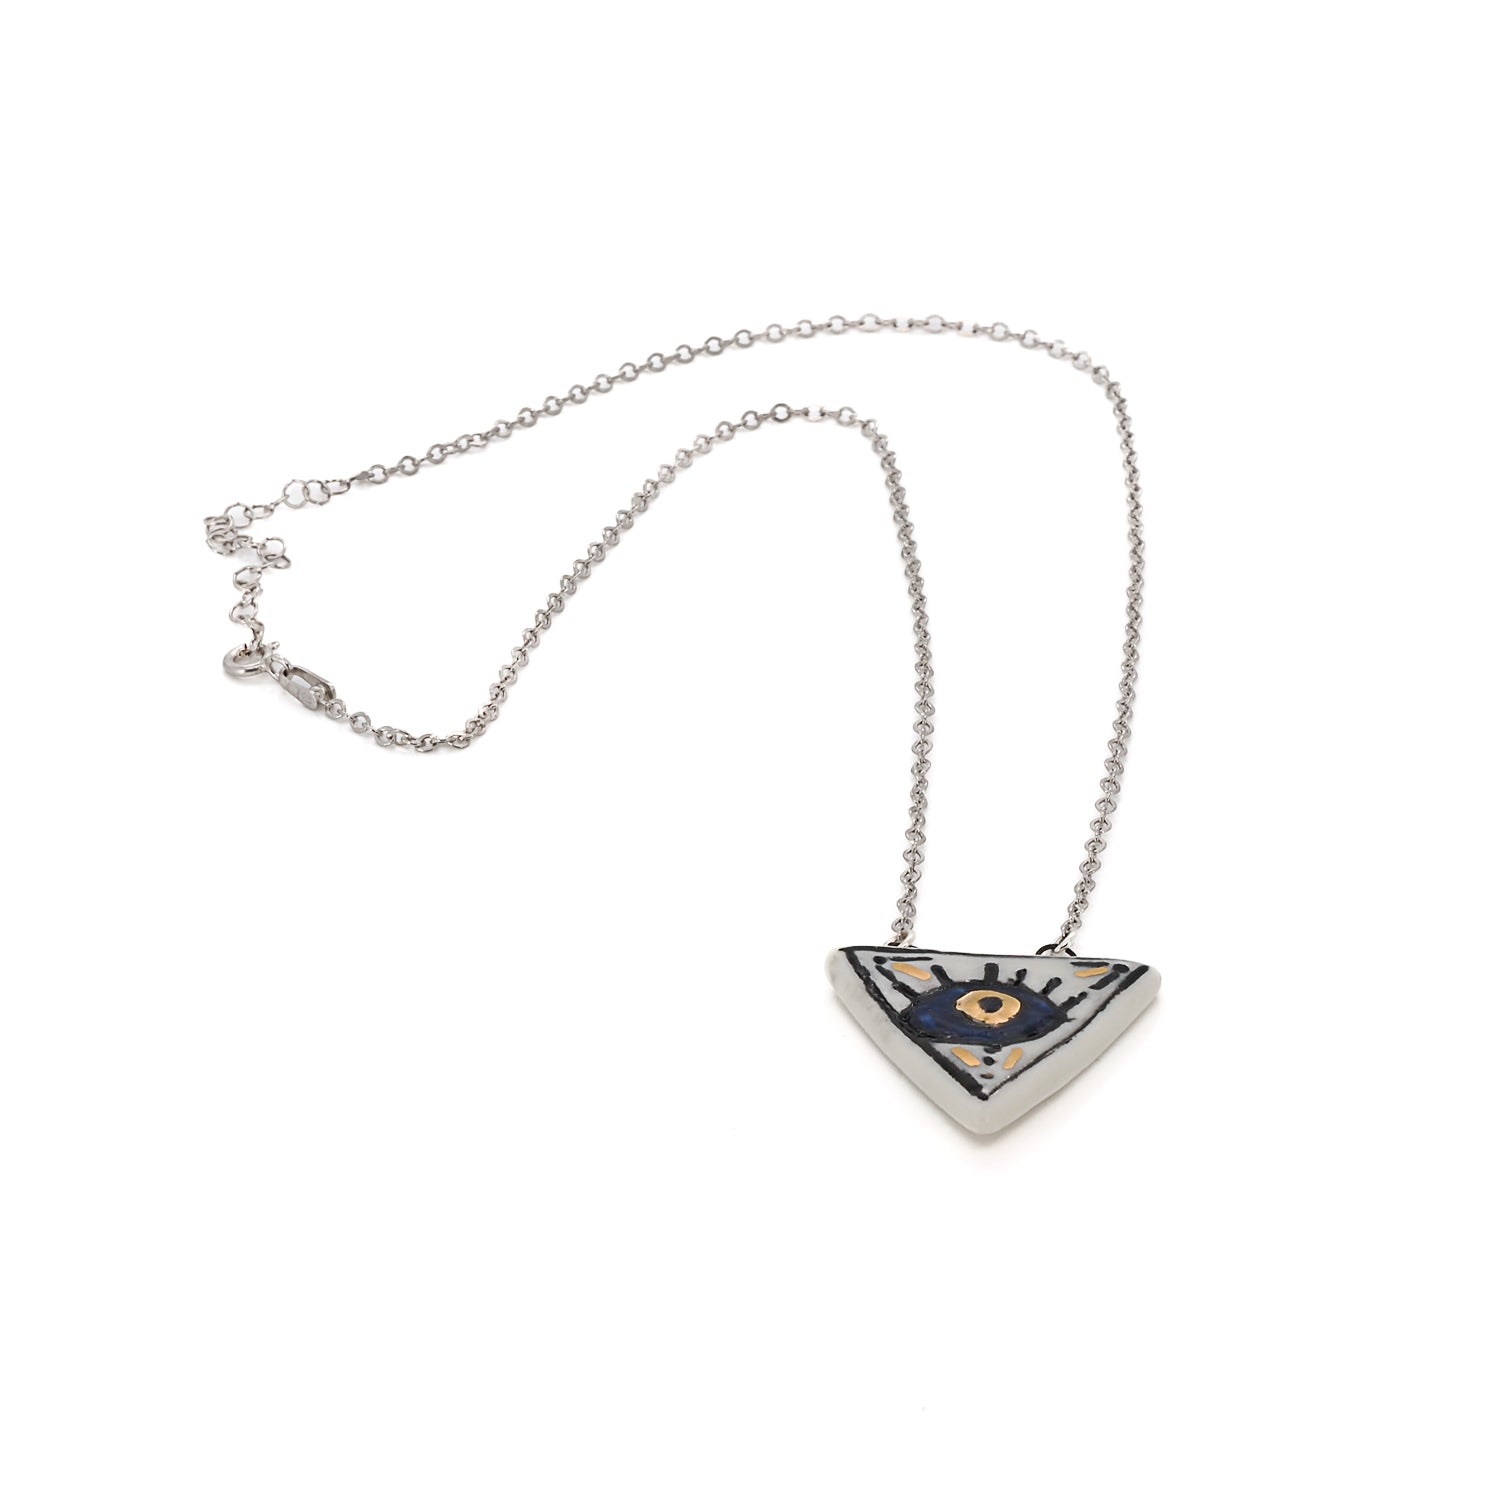 Hand-Painted Triangle Ceramic Pendant - A unique work of art radiating with vibrant colors.